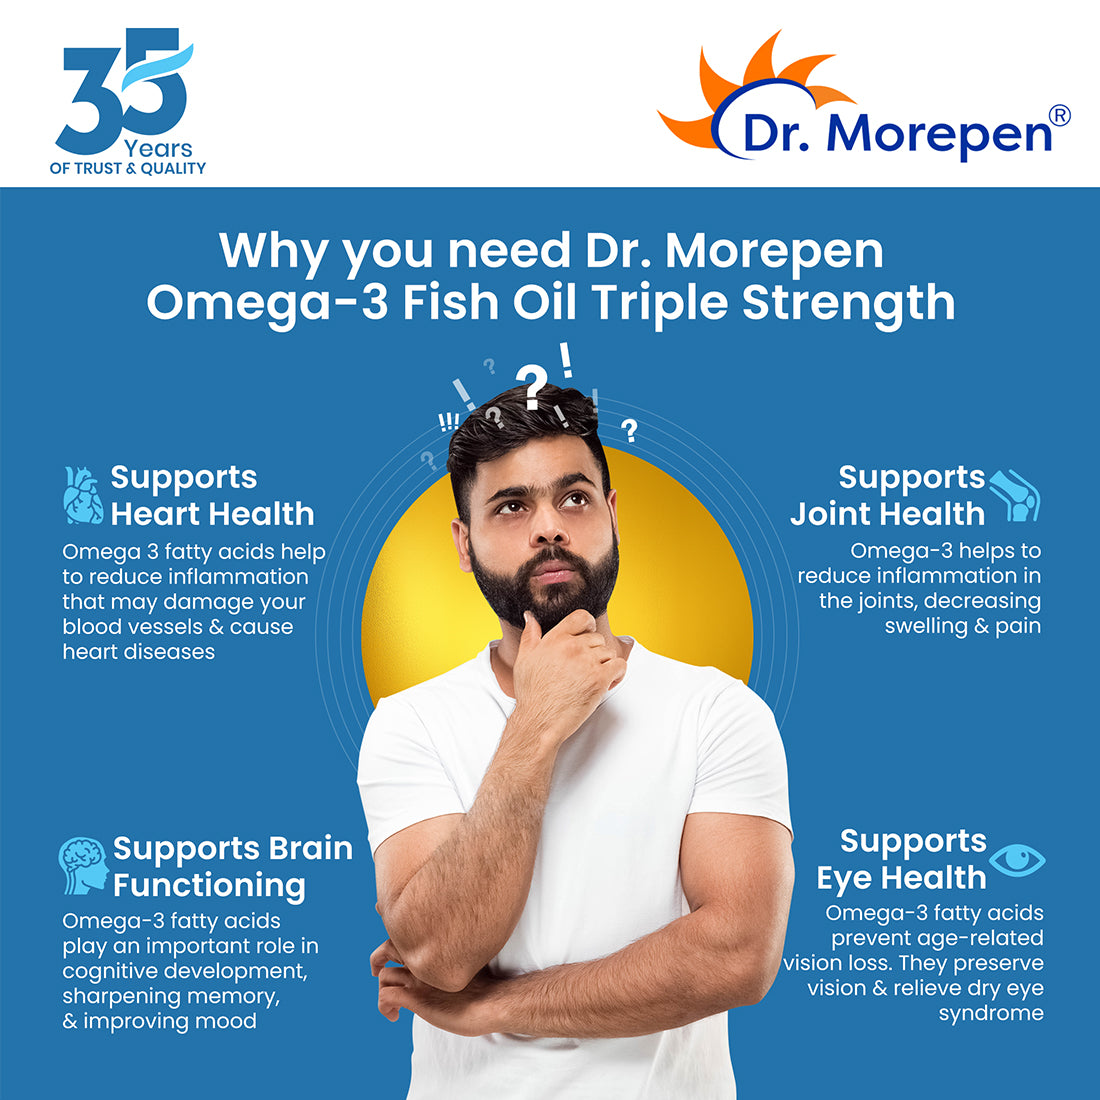 Dr. Morepen Omega 3 Deep Sea Fish Oil Triple Strength | 1250mg with 900mg DHA & EPA | |High Potency Fish Oil | Maintains Heart and Brain Health, Strengthens Bones & Joints | 60 Softgels